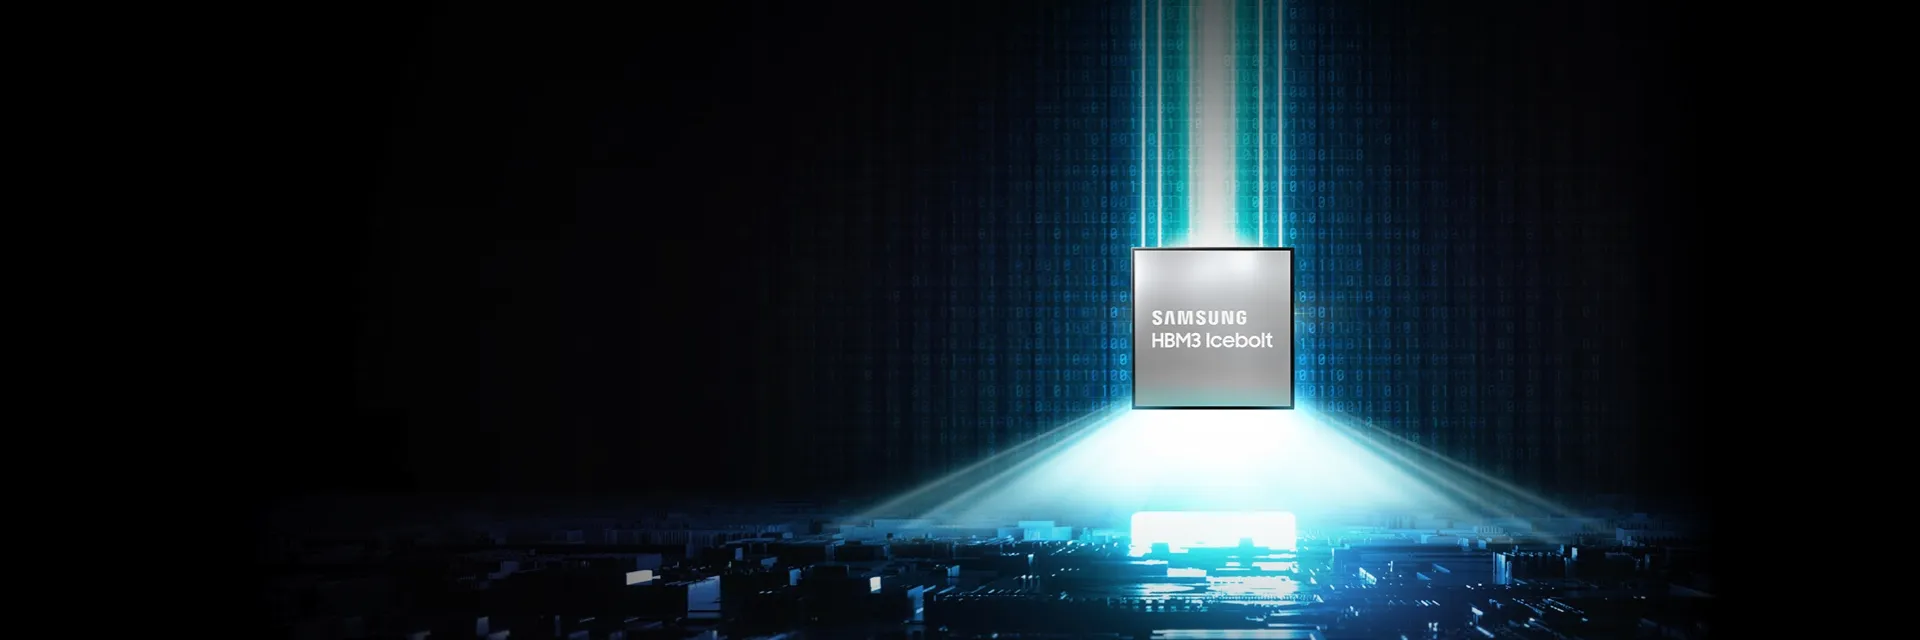 Shinebolt: Samsung's Pioneering HBM3E Memory Aims to Redefine High-Performance Computing